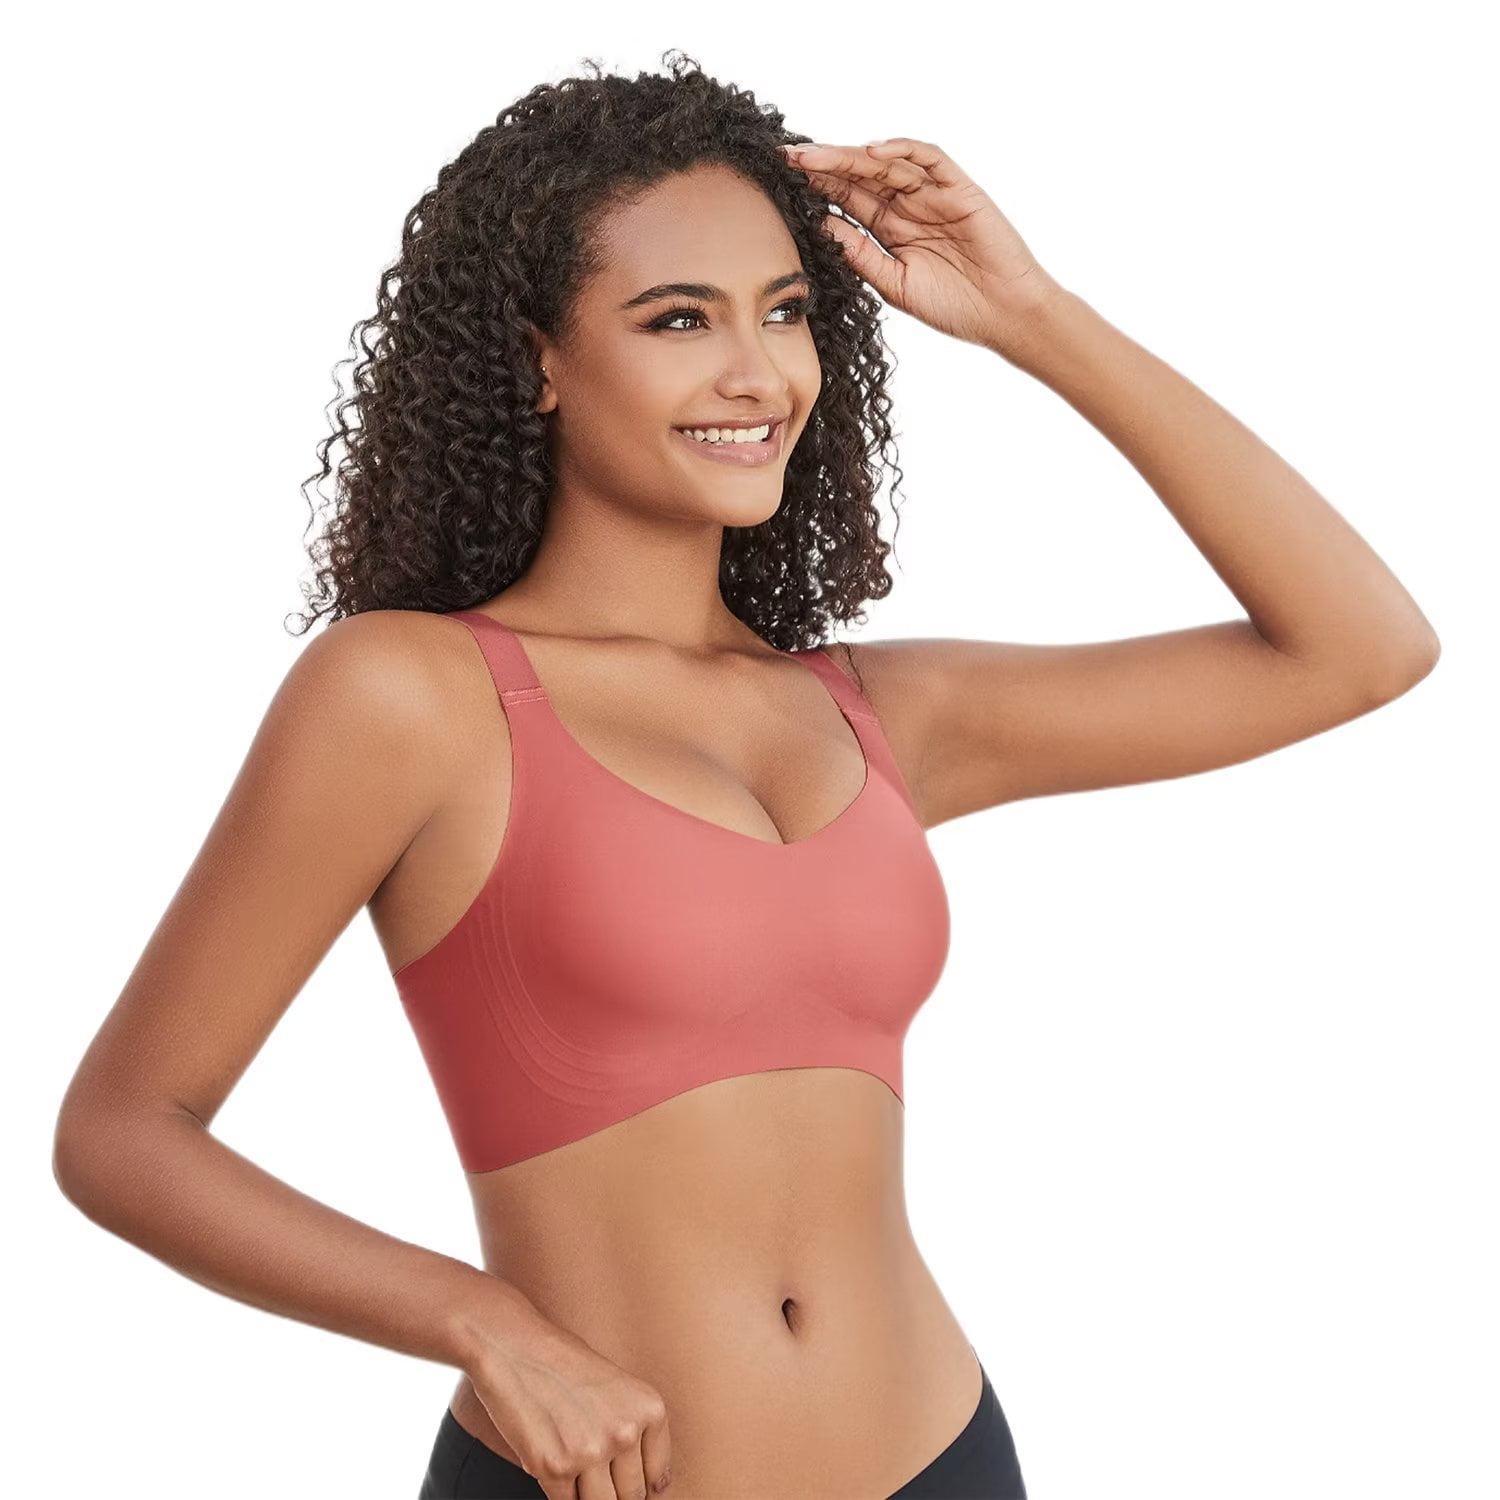 Yunleeb Support Bra for Women Wireless Everyday Wear,Fit for